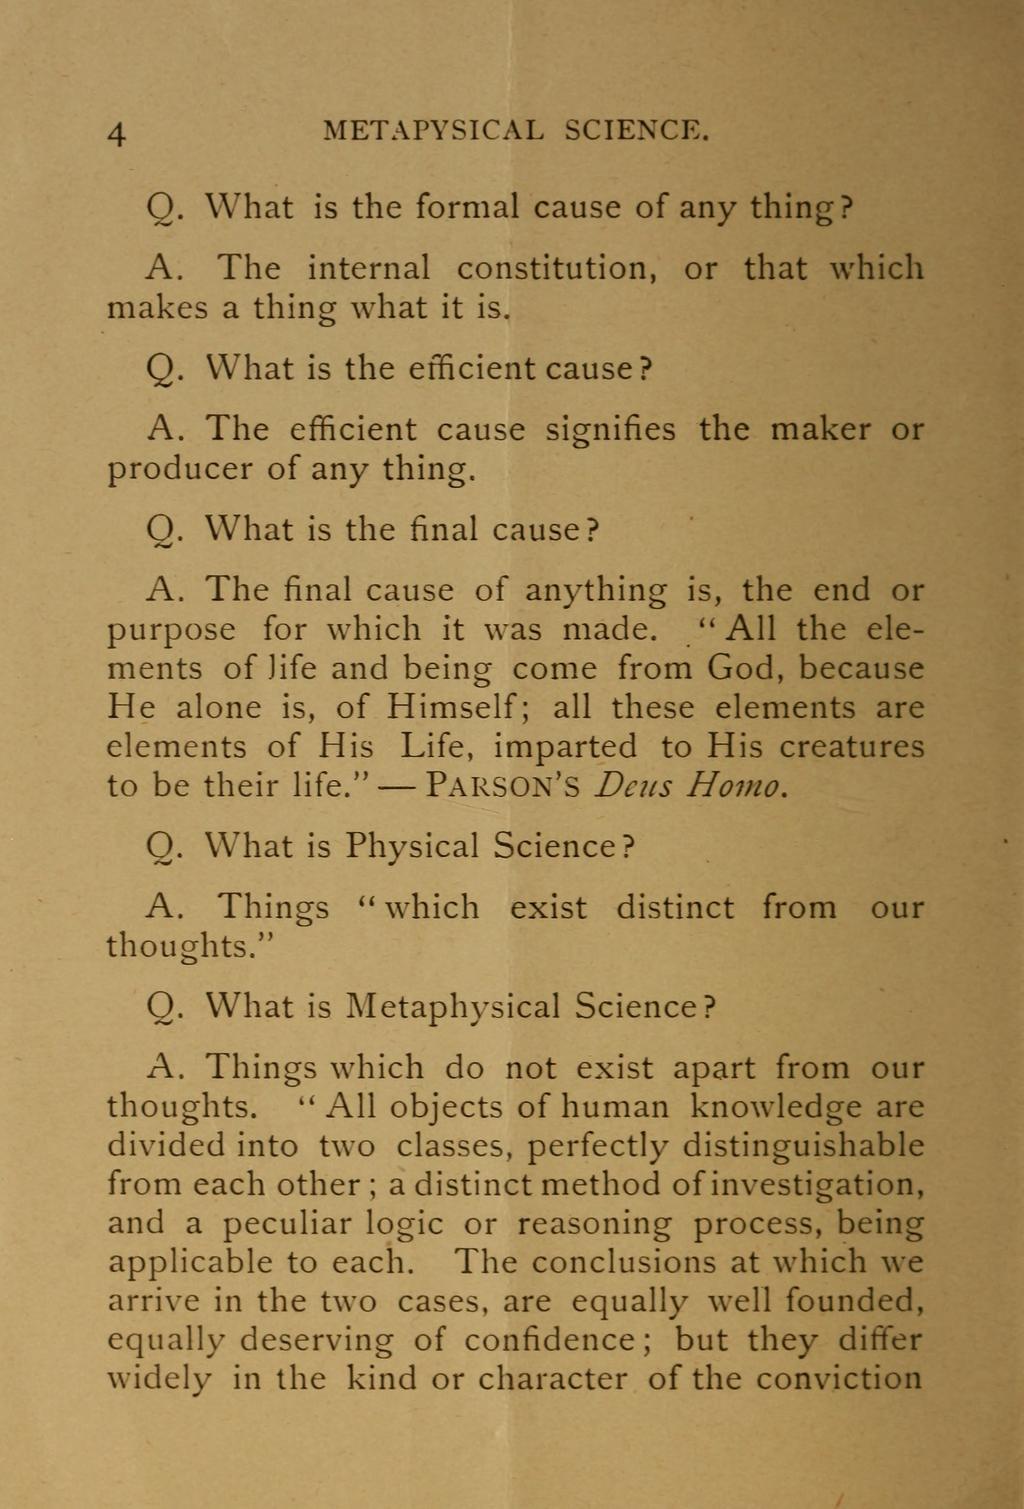 4 METAPYSICAL SCIENCE. Q. What is the formal cause of any thing? A. The internal constitution, or that which makes a thing what it is. Q. What is the efficient cause? A. The efficient cause signifies the maker or producer of any thing.